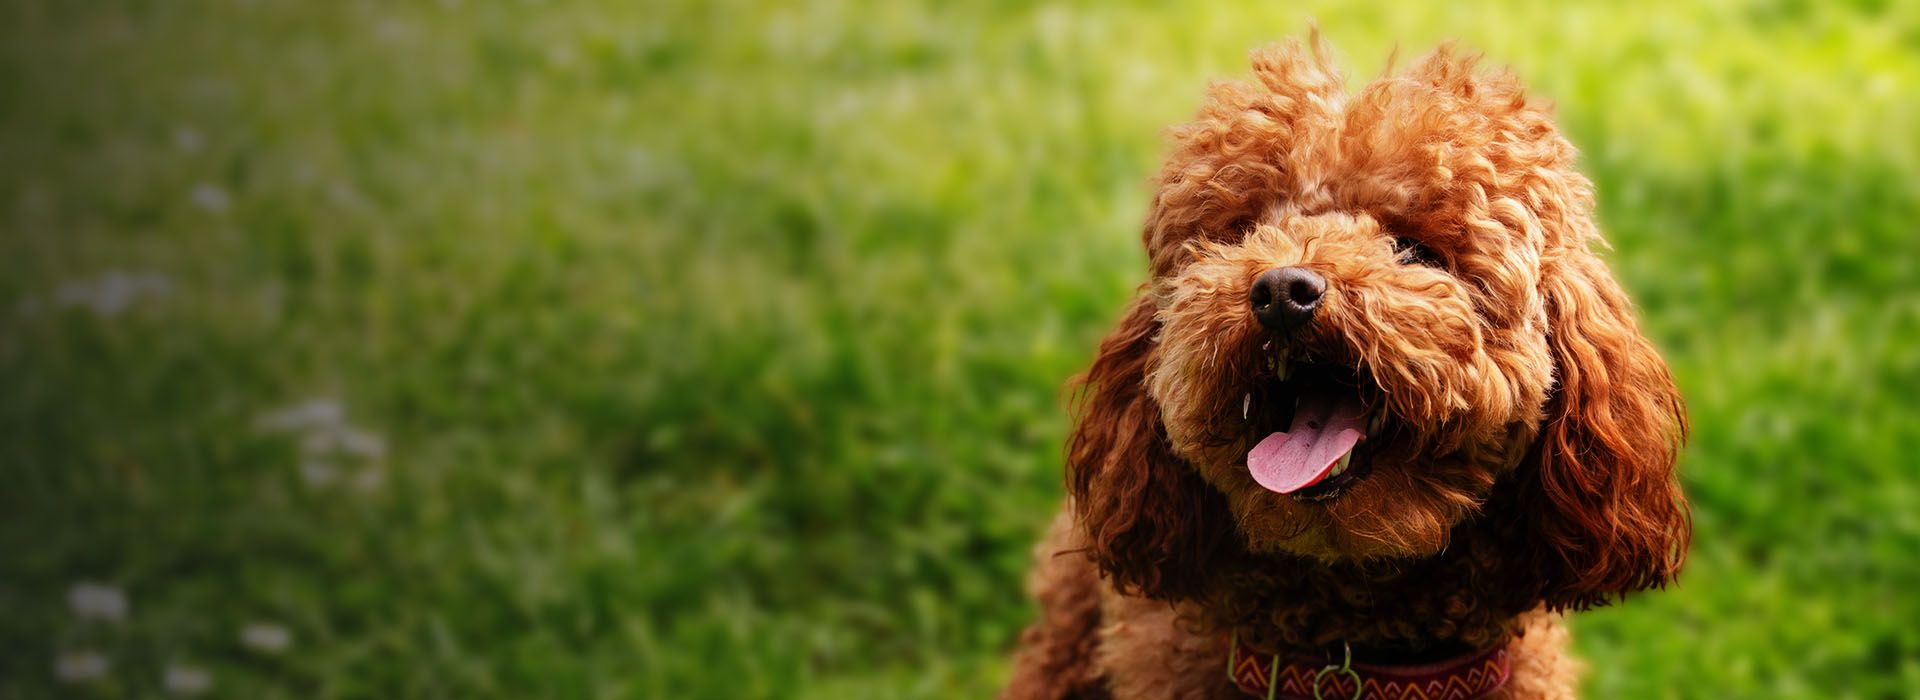 With a green grass in the background is a happy brown poodle with its tongue sticking out and its face facing forward